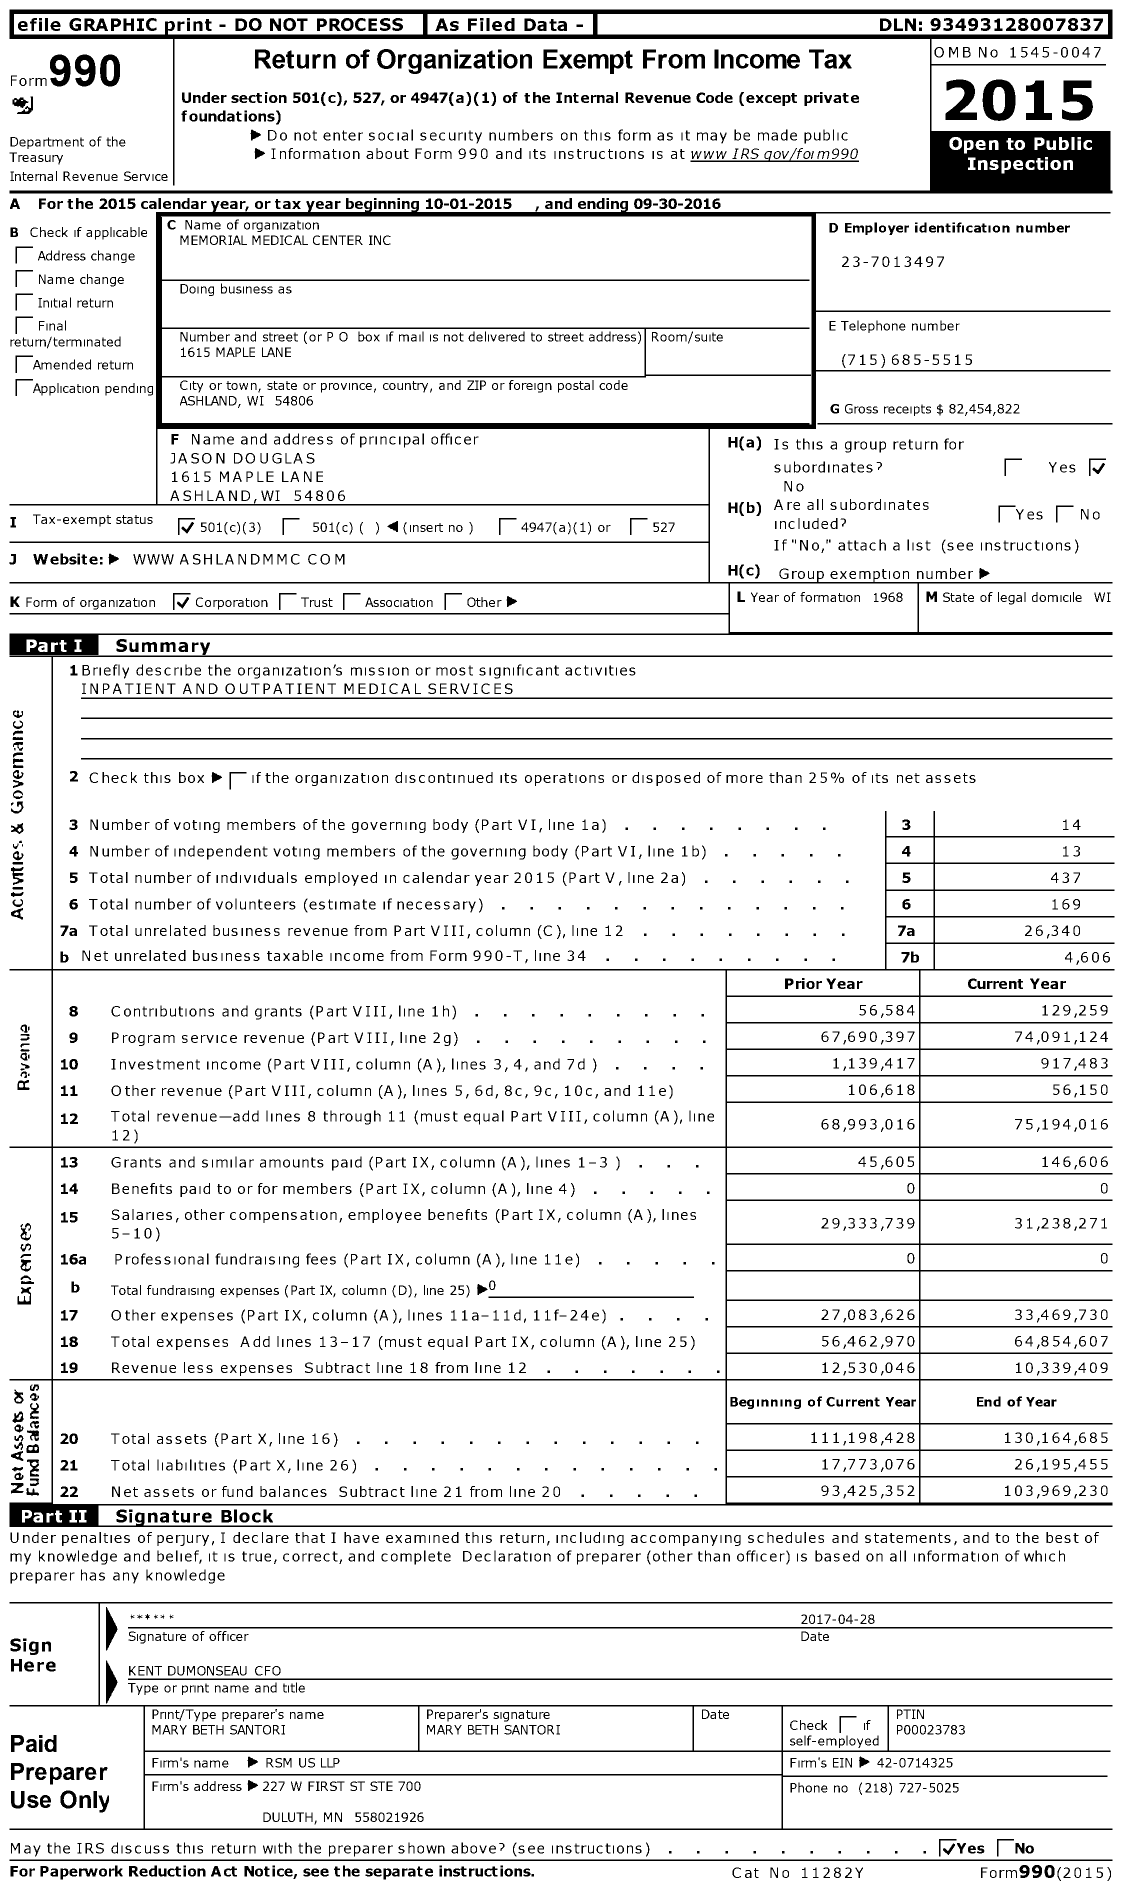 Image of first page of 2015 Form 990 for Memorial Medical Center (MMC)